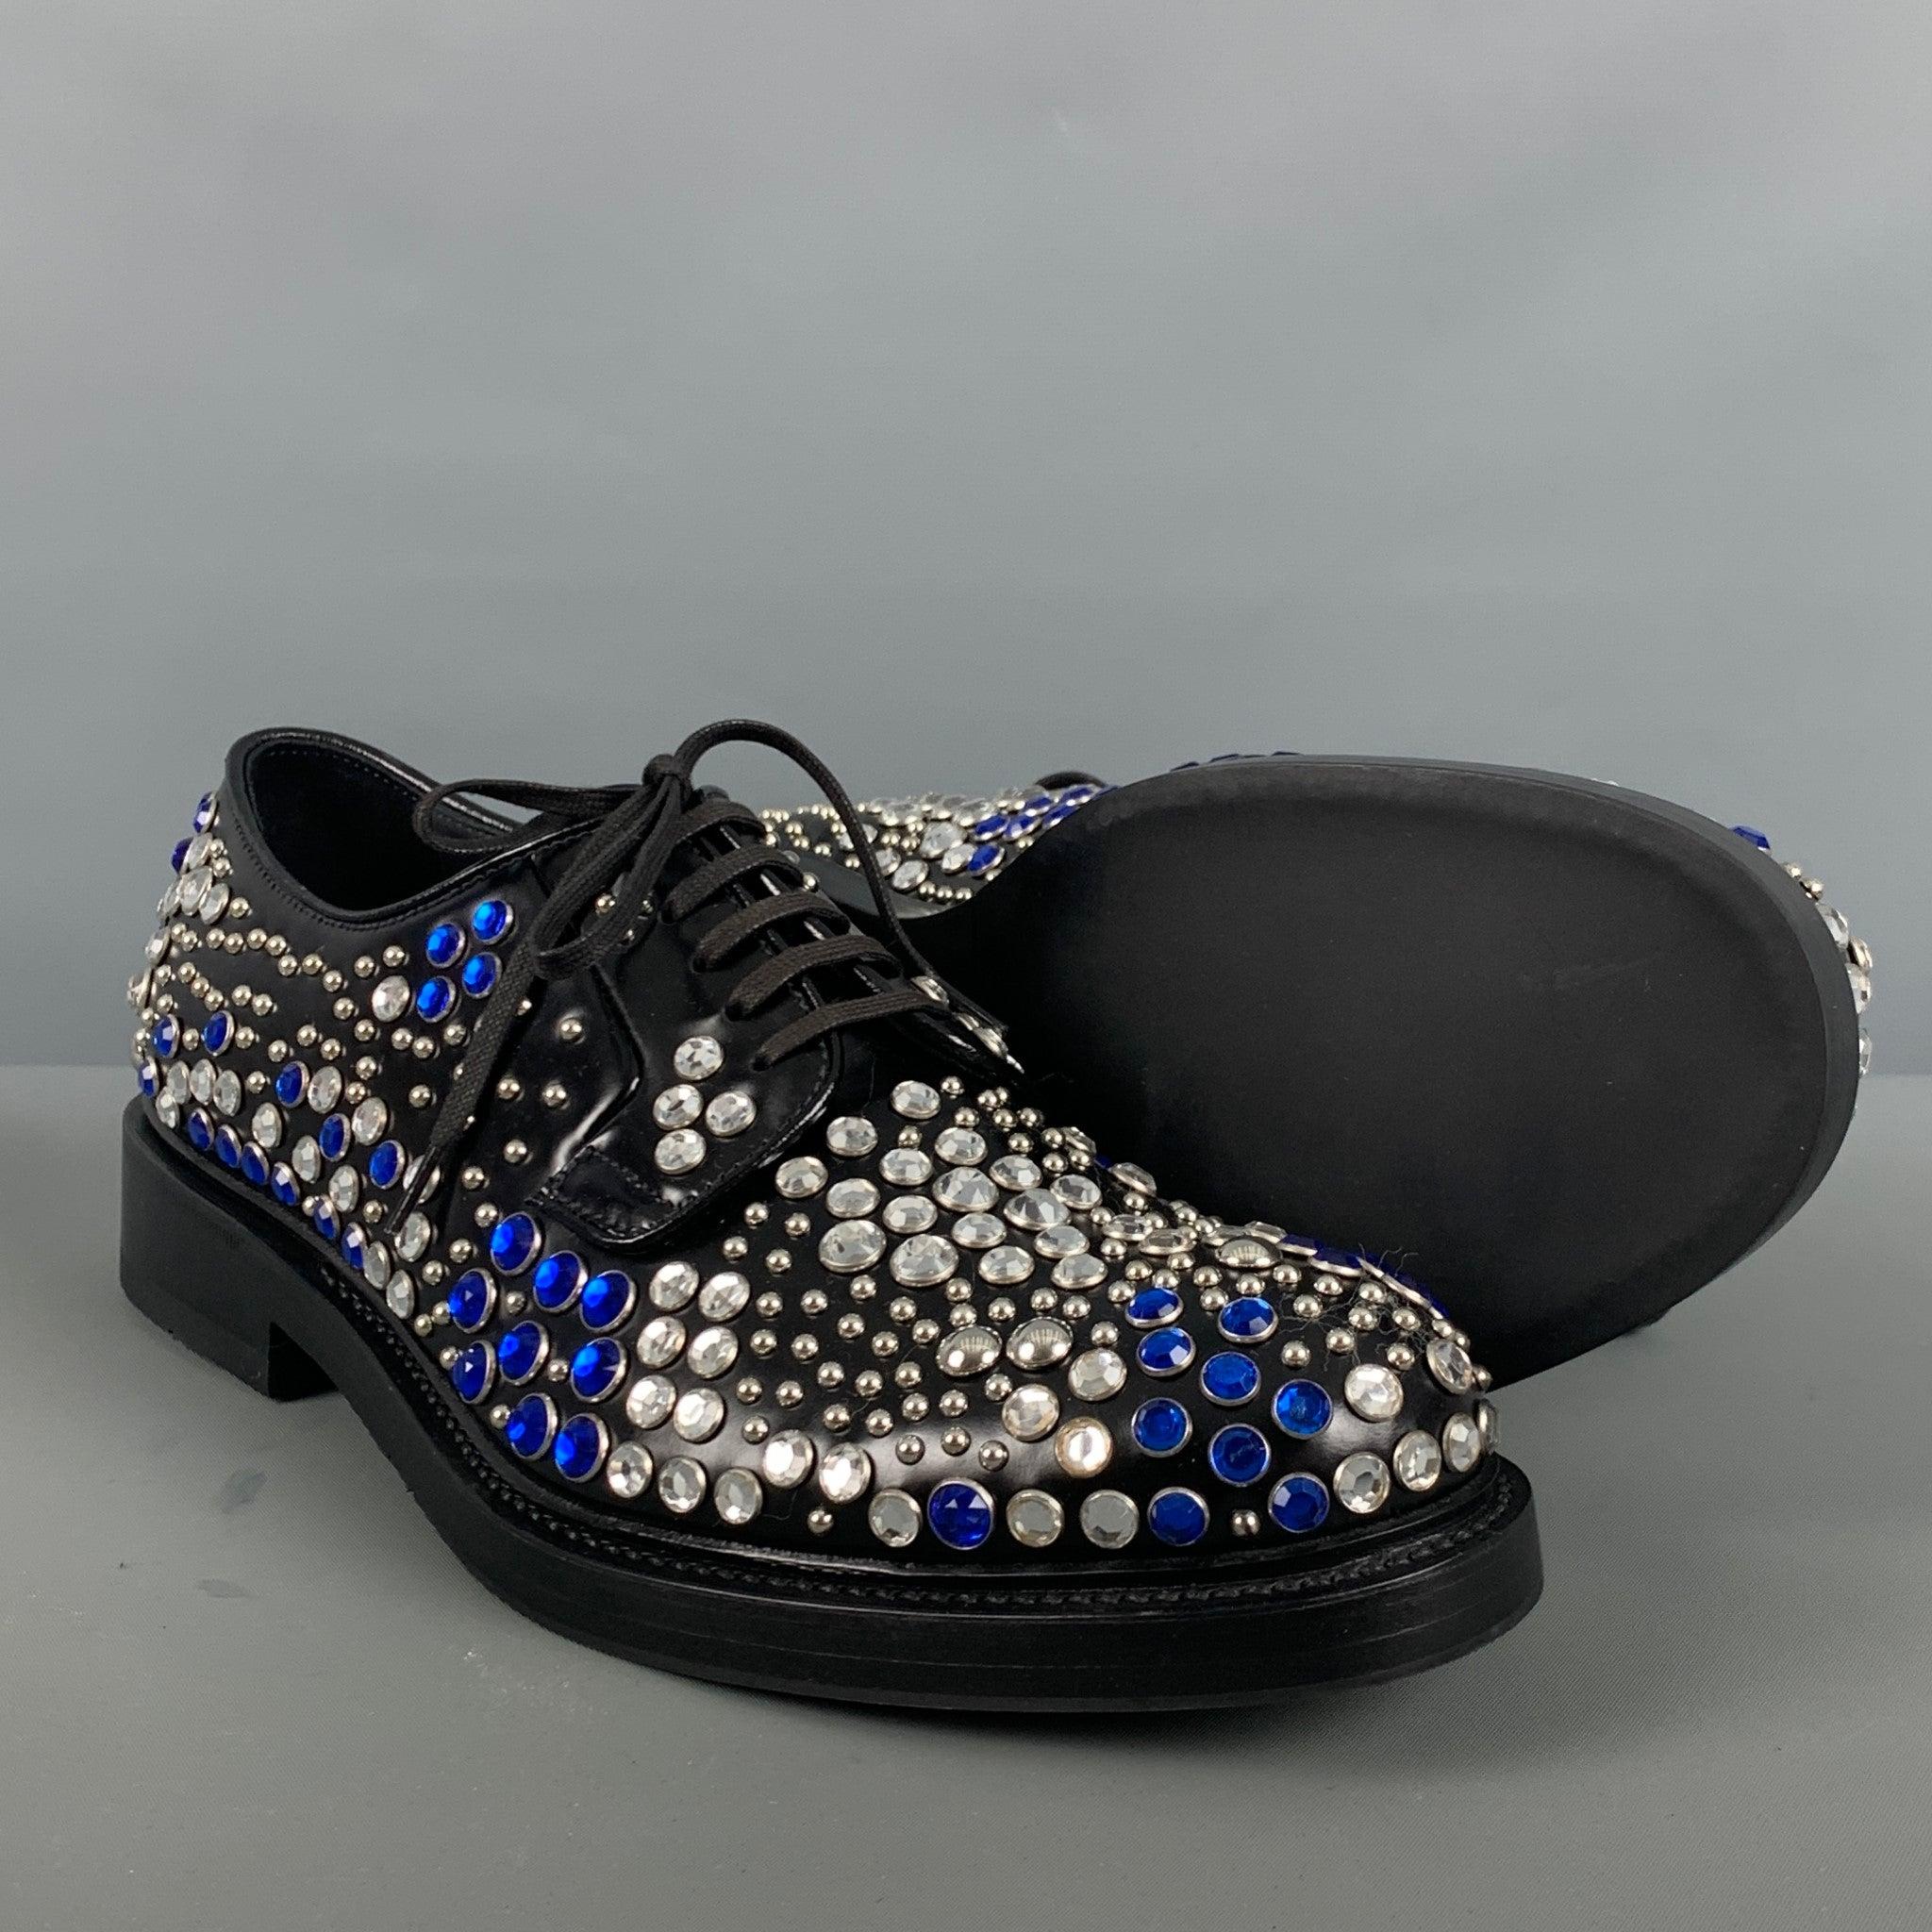 PRADA Size 9 Black Silver & Blue Studded Leather Lace Up Shoes For Sale 1